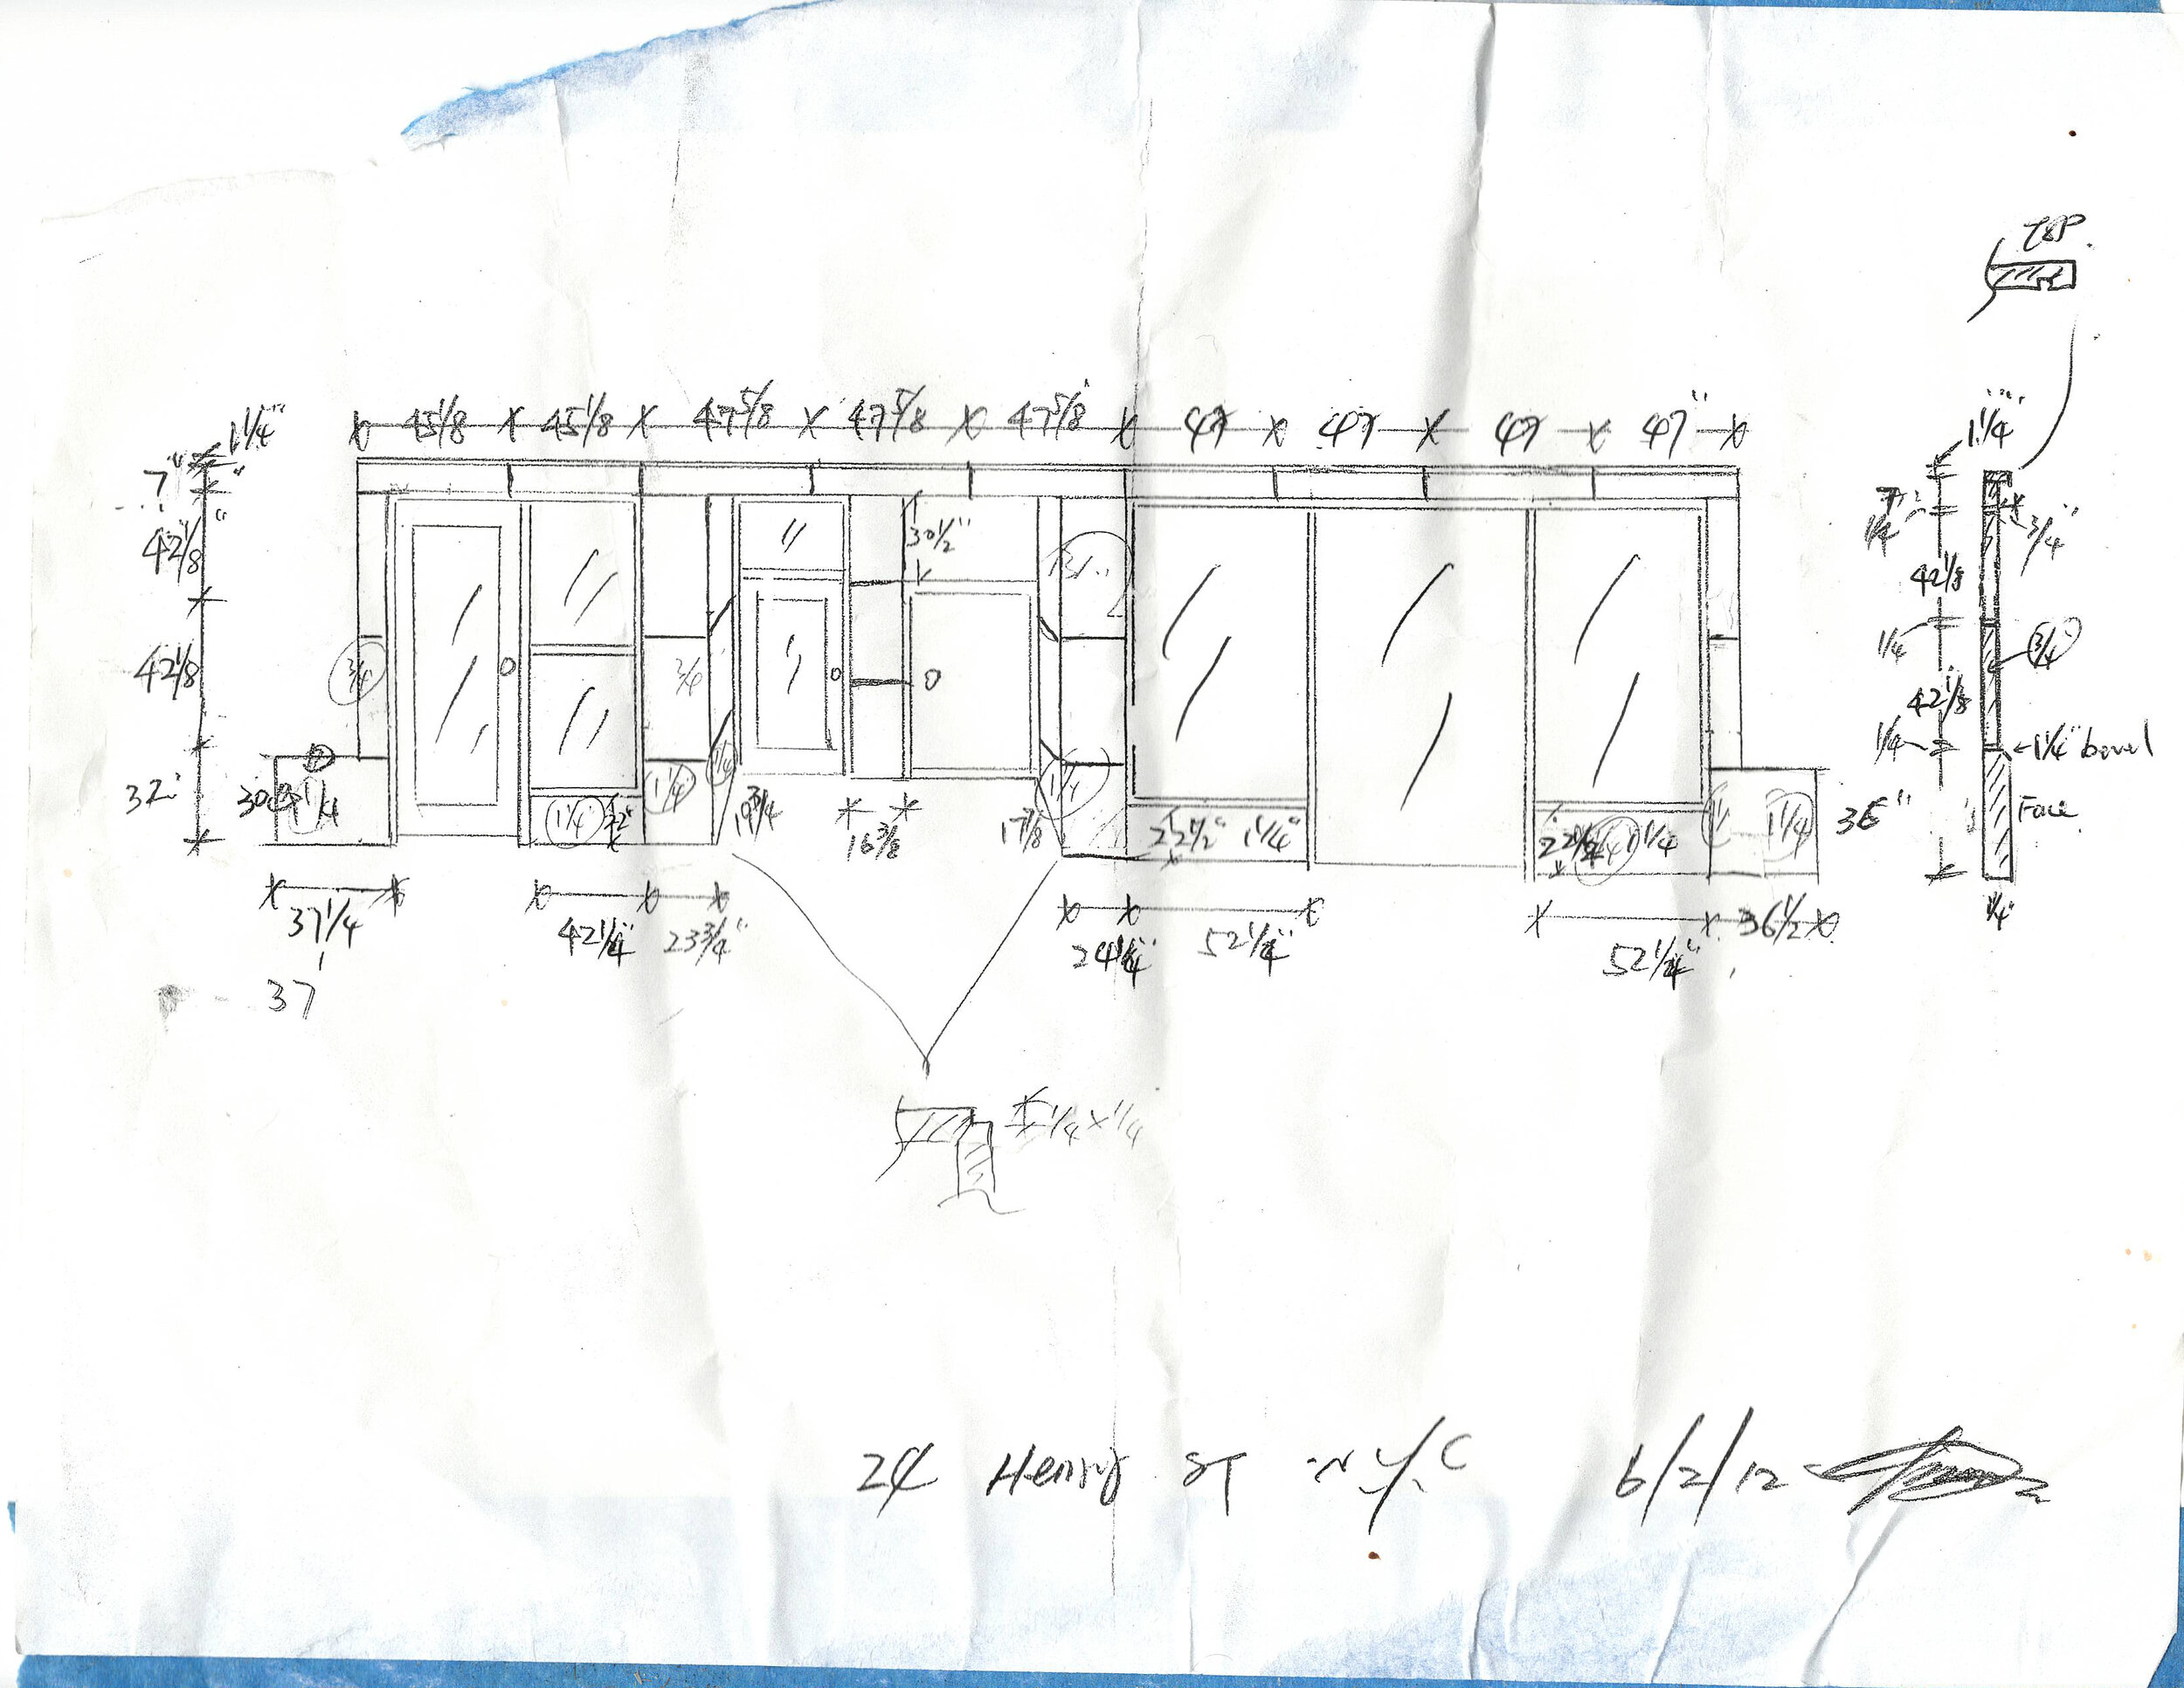  24 Henry Street facade drawing dated 02 June 2012 